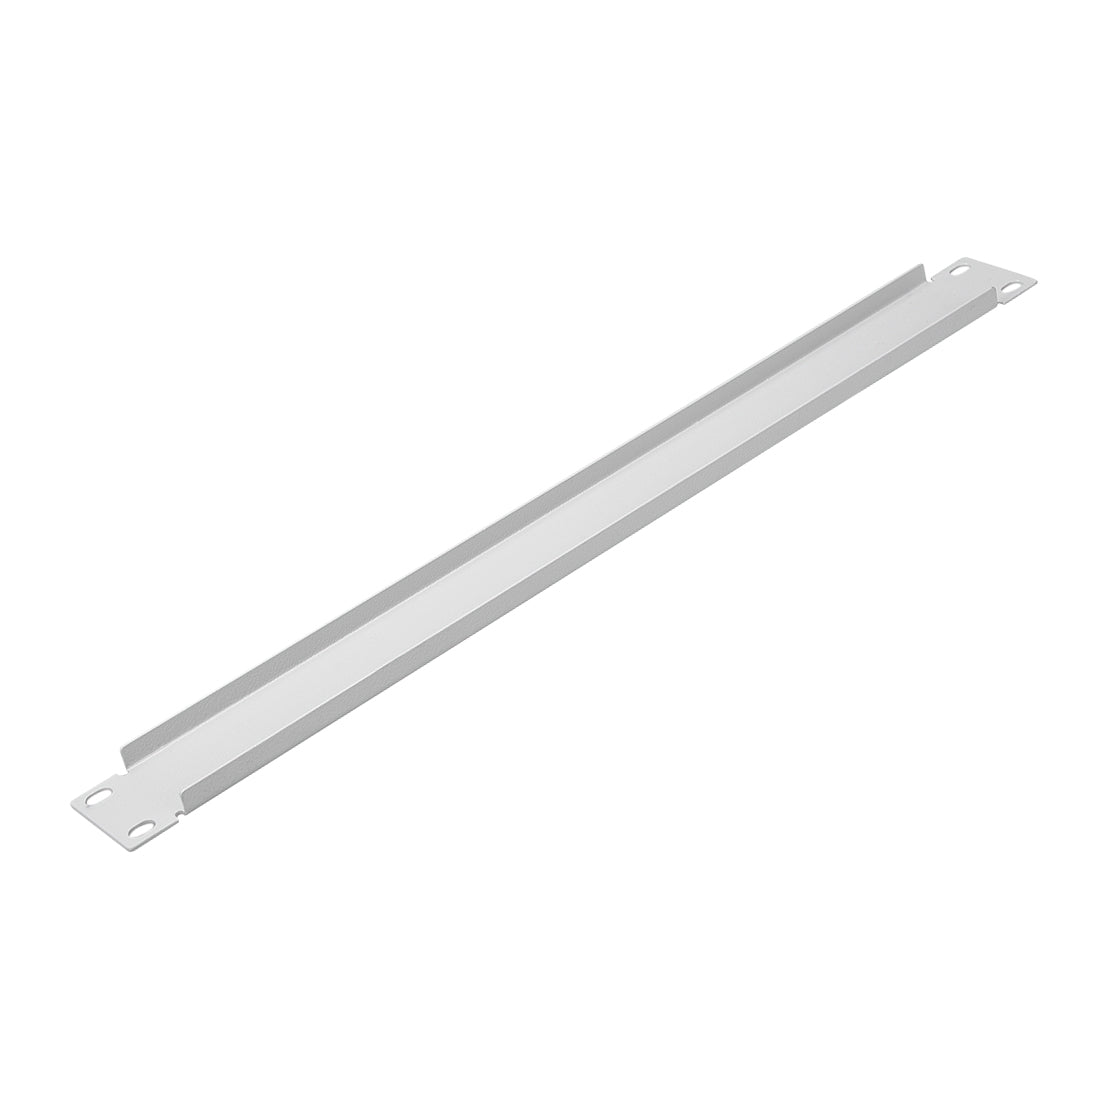 uxcell Uxcell 1U Blanking Panel 2pcs - Metal Rack Mount Filler Panel for 19-Inch Server Rack Enclosure or Cabinet - White